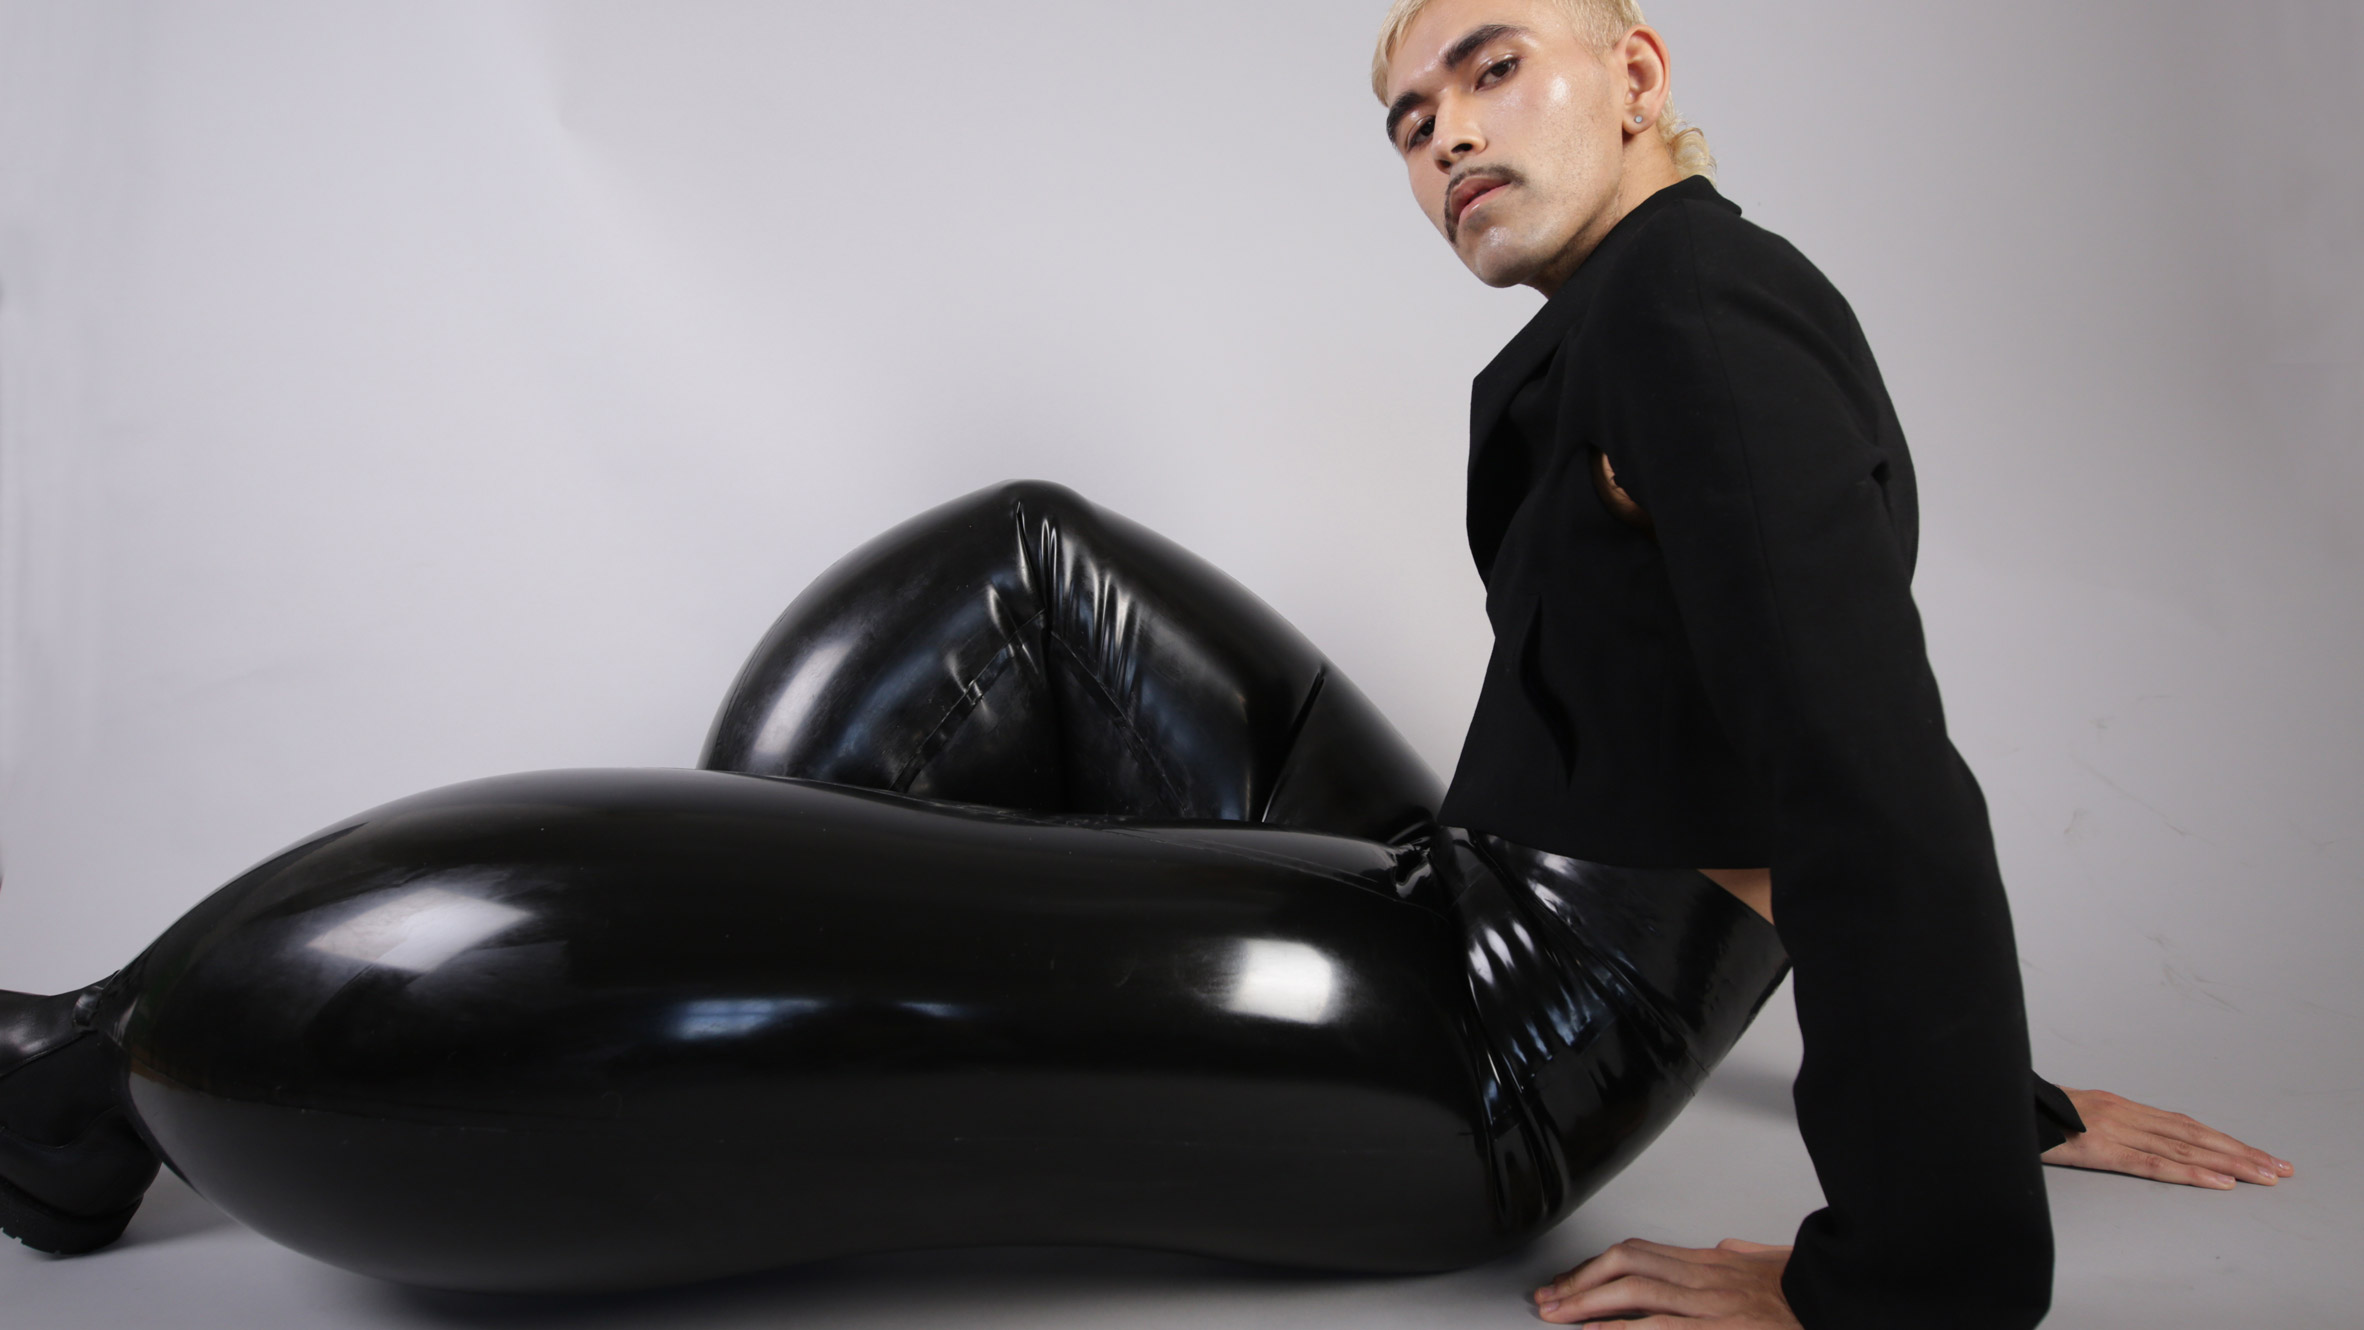 Harikrishnan's blow-up latex pants on sale with do not overinflate warning